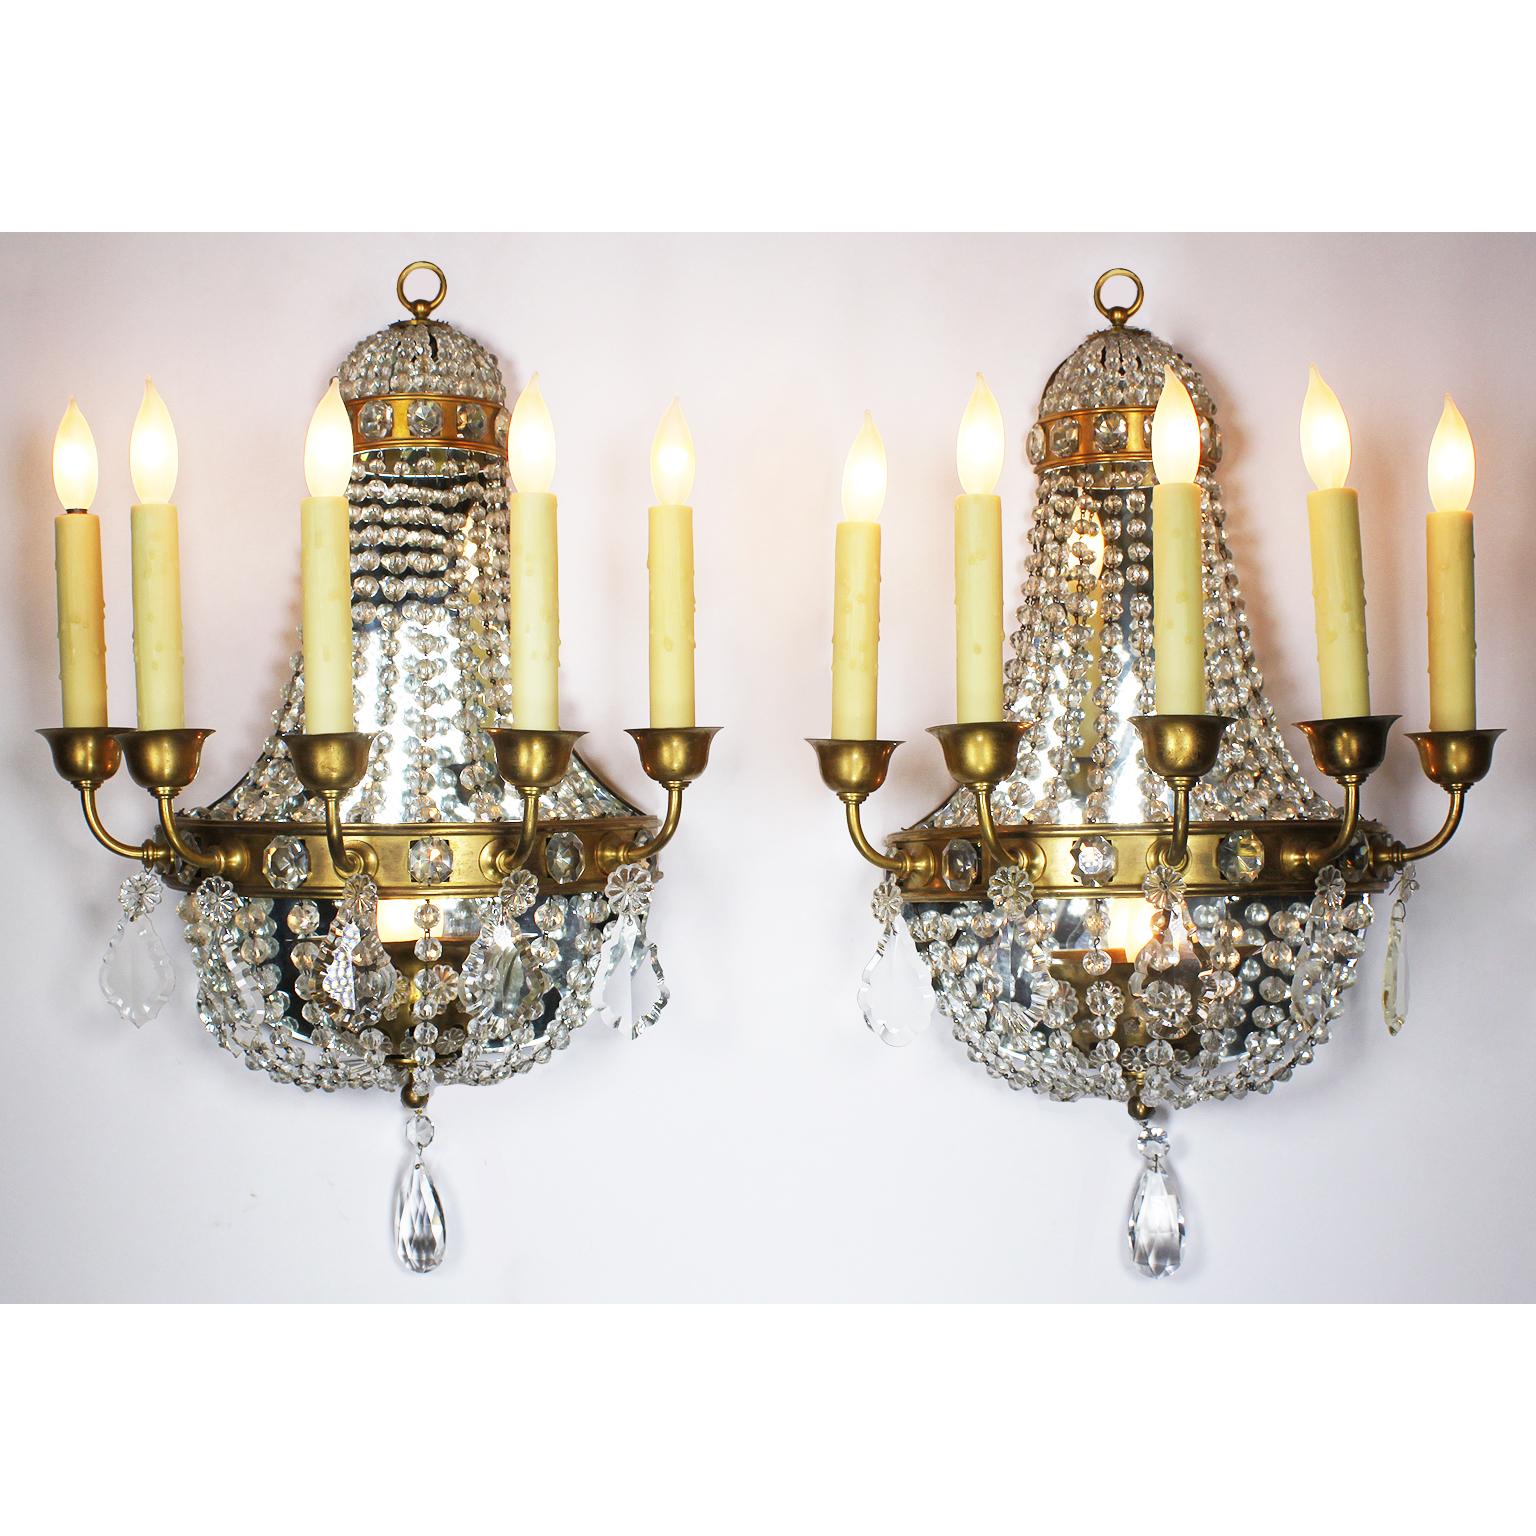 Carved Pair of French Neoclassical Revival Louis XVI Style Cut-Glass Wall Sconces For Sale